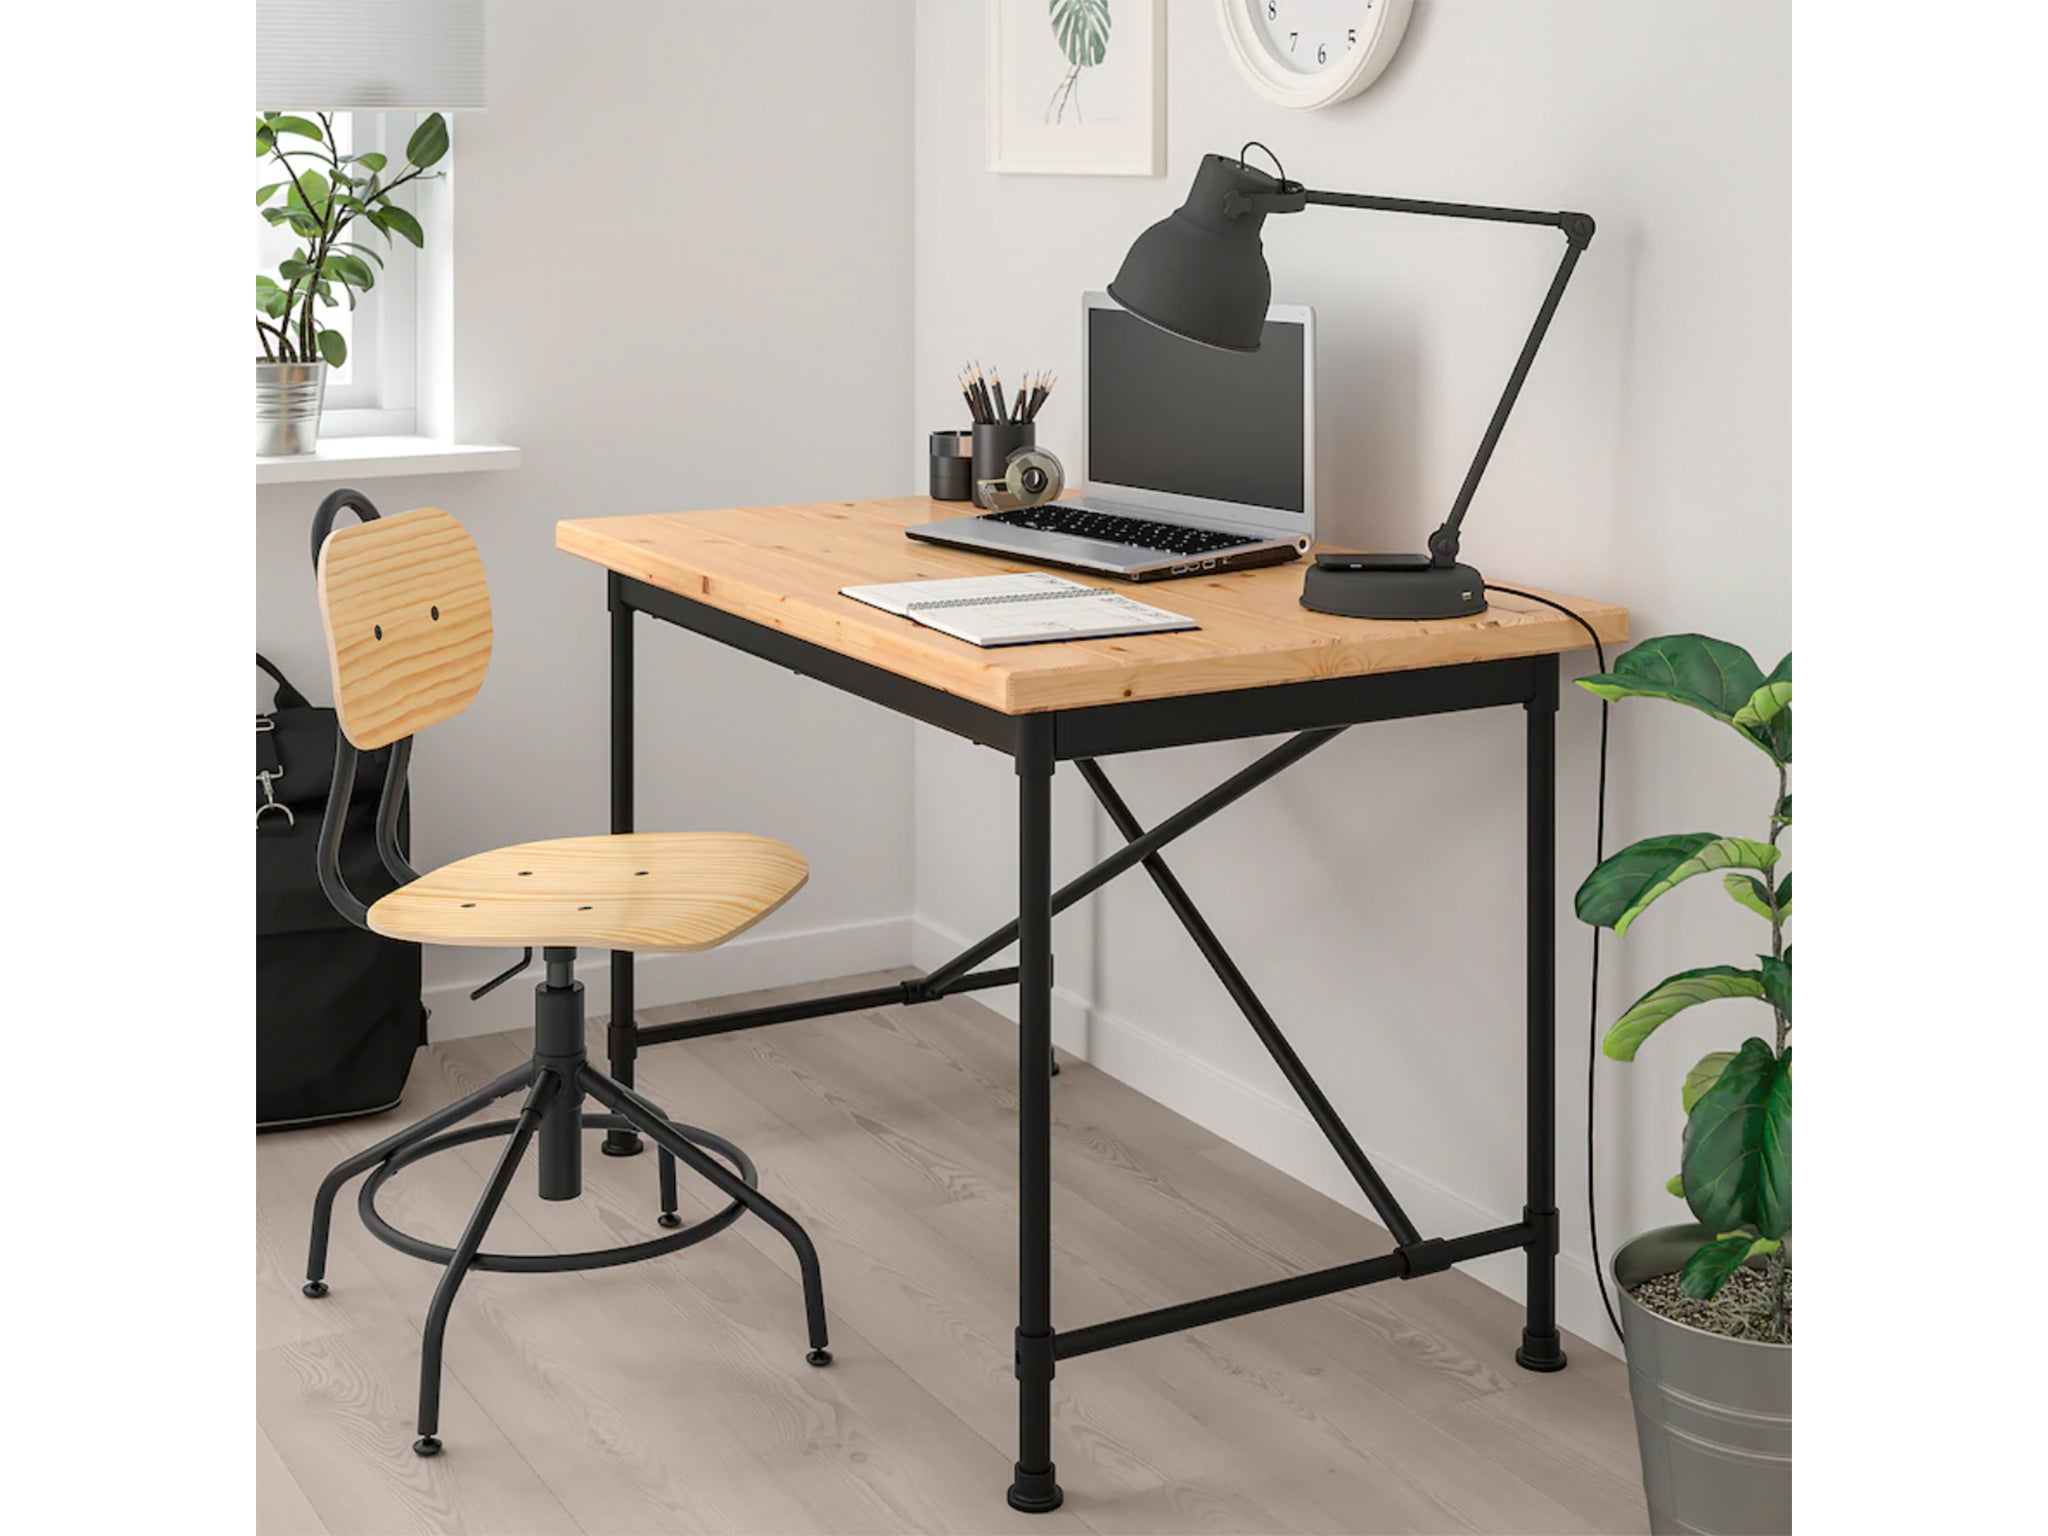 While working from home, get a good desk and chair that will help your posture, help with productivity and separate your work life from your free time